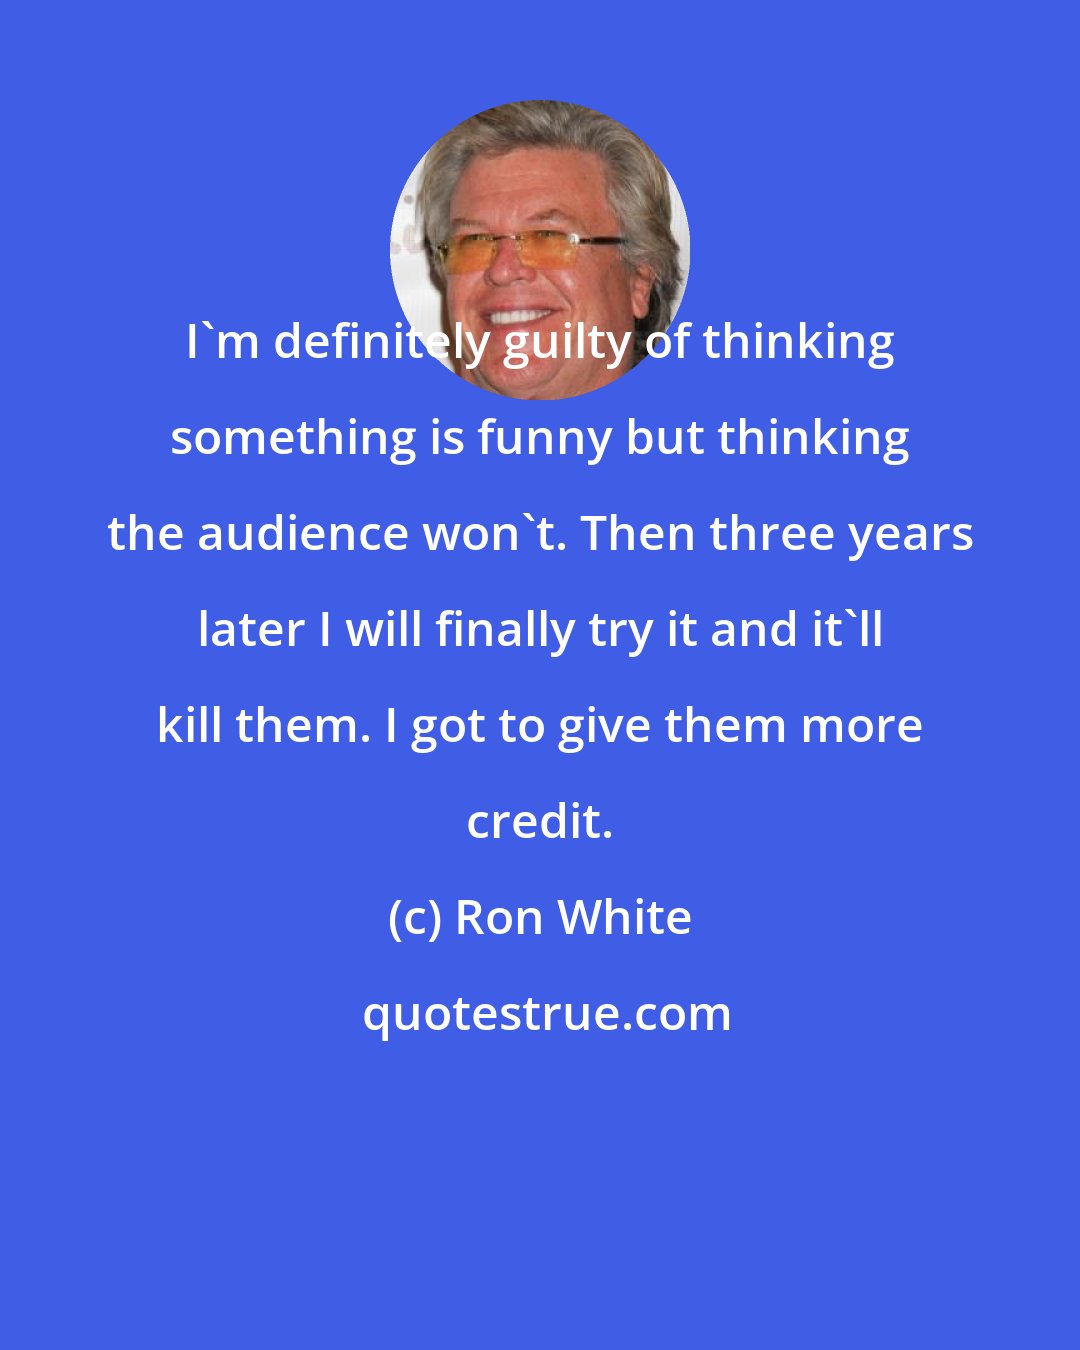 Ron White: I'm definitely guilty of thinking something is funny but thinking the audience won't. Then three years later I will finally try it and it'll kill them. I got to give them more credit.